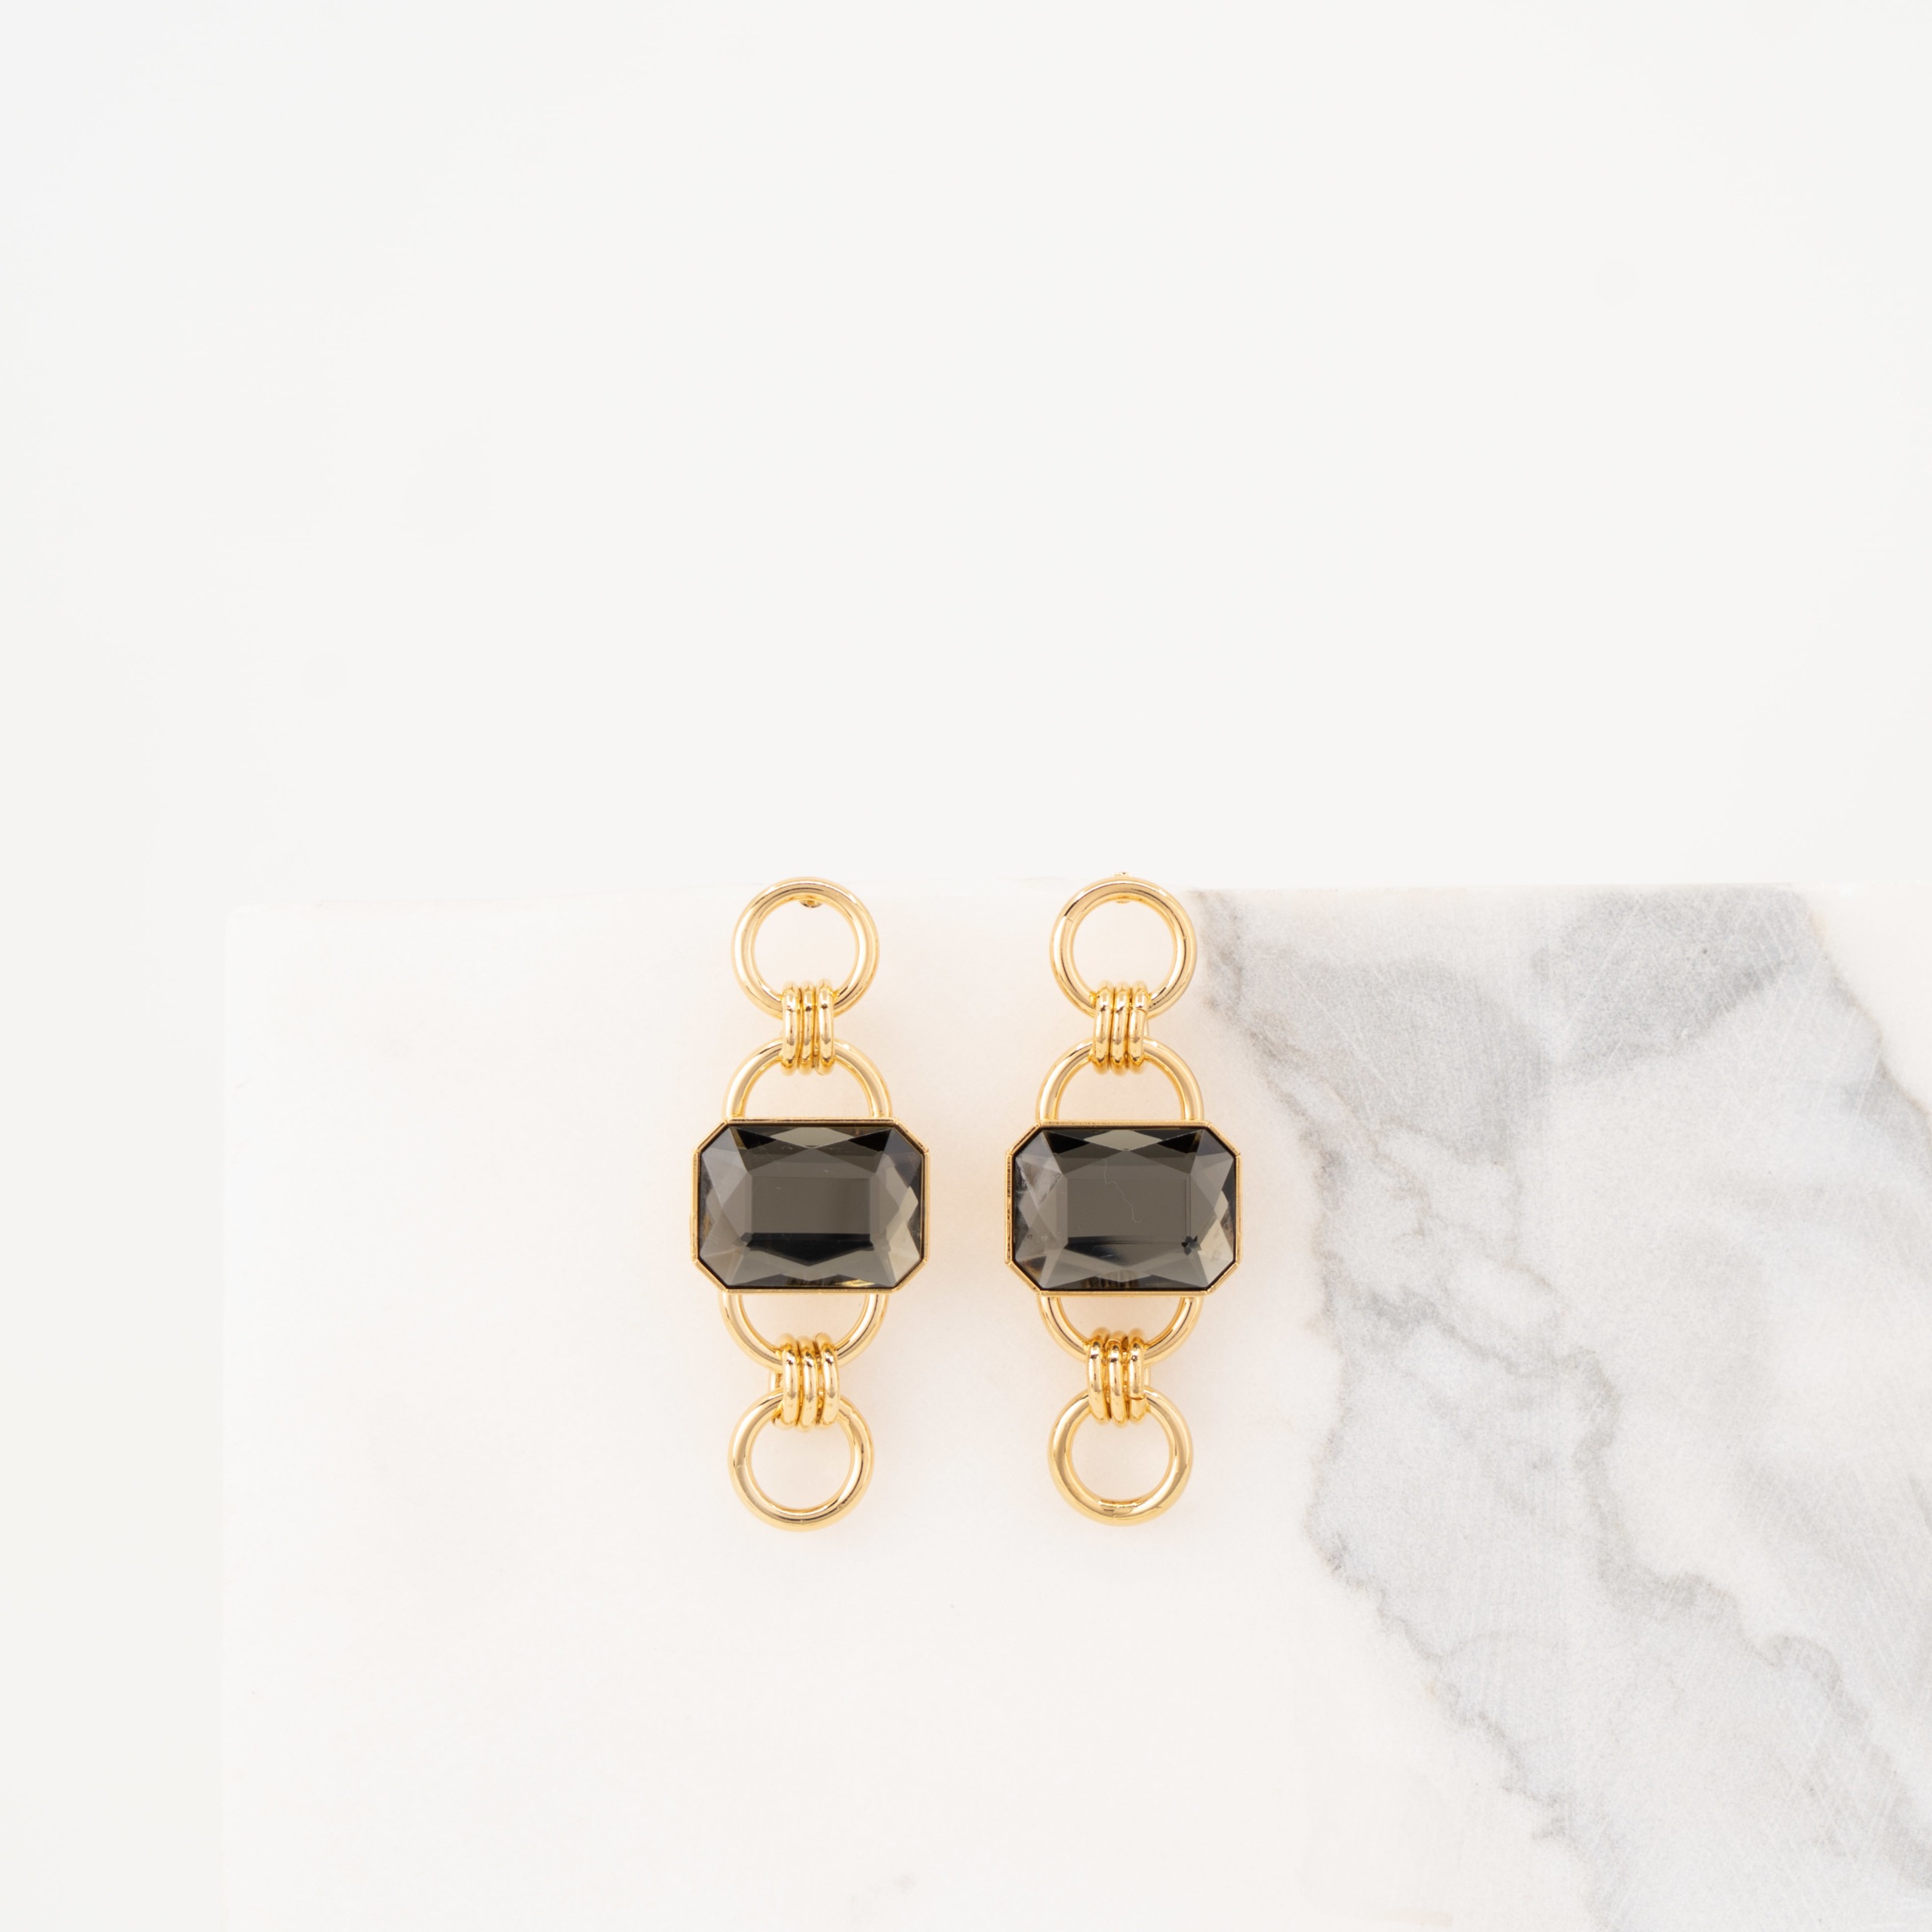 Tiffany anthracite short earrings